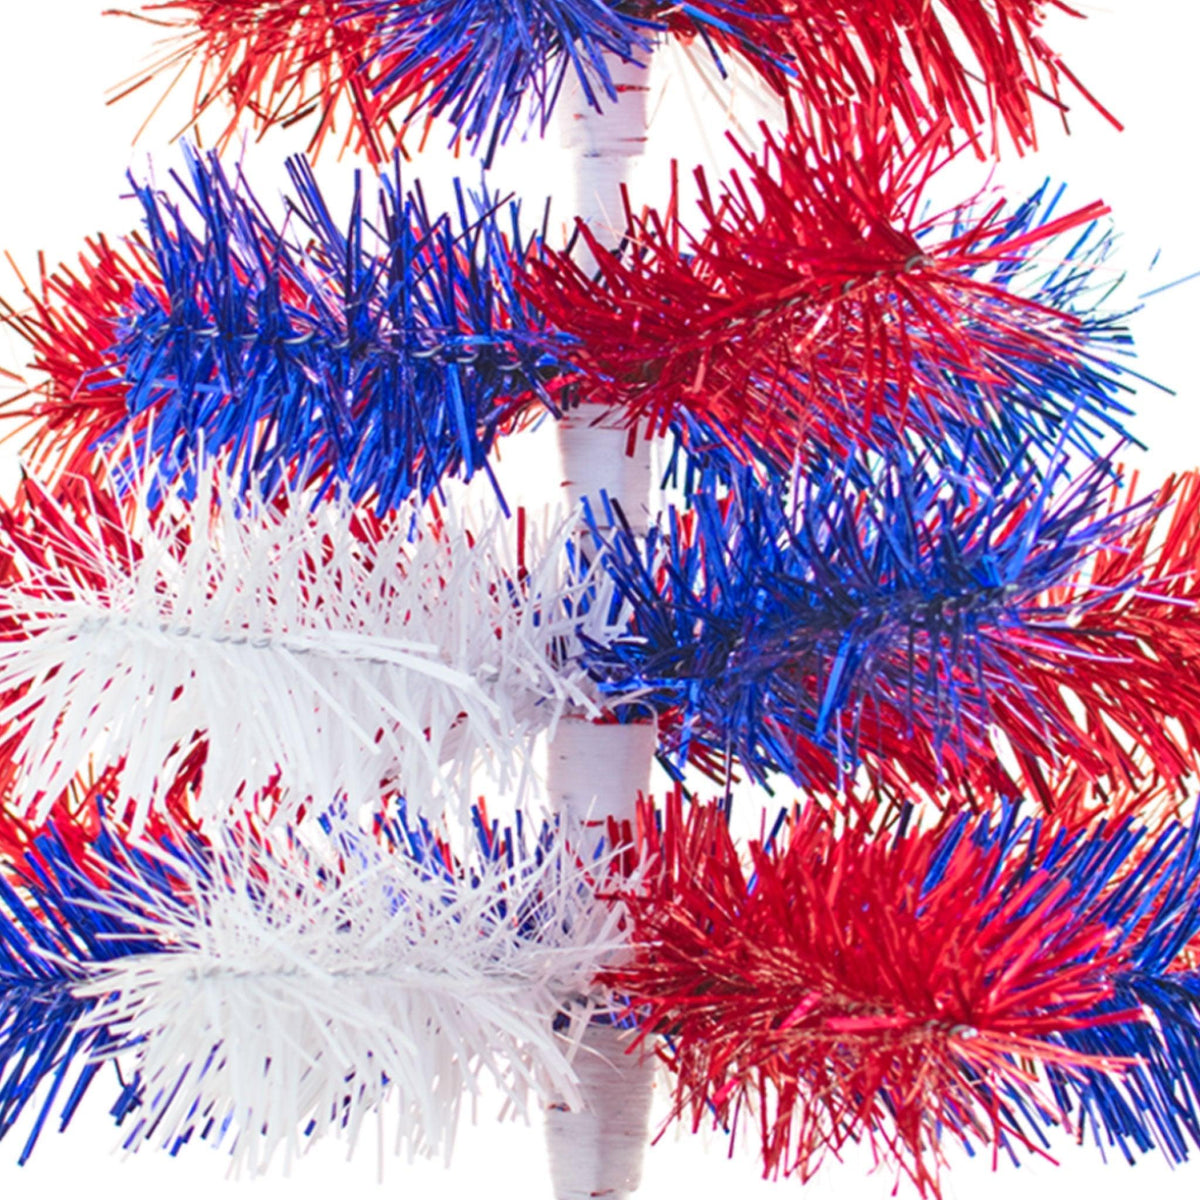 Middle branches of the 18in Tall Red White and Blue Mixed Tinsel Christmas Tree on sale at leedisplay.com.